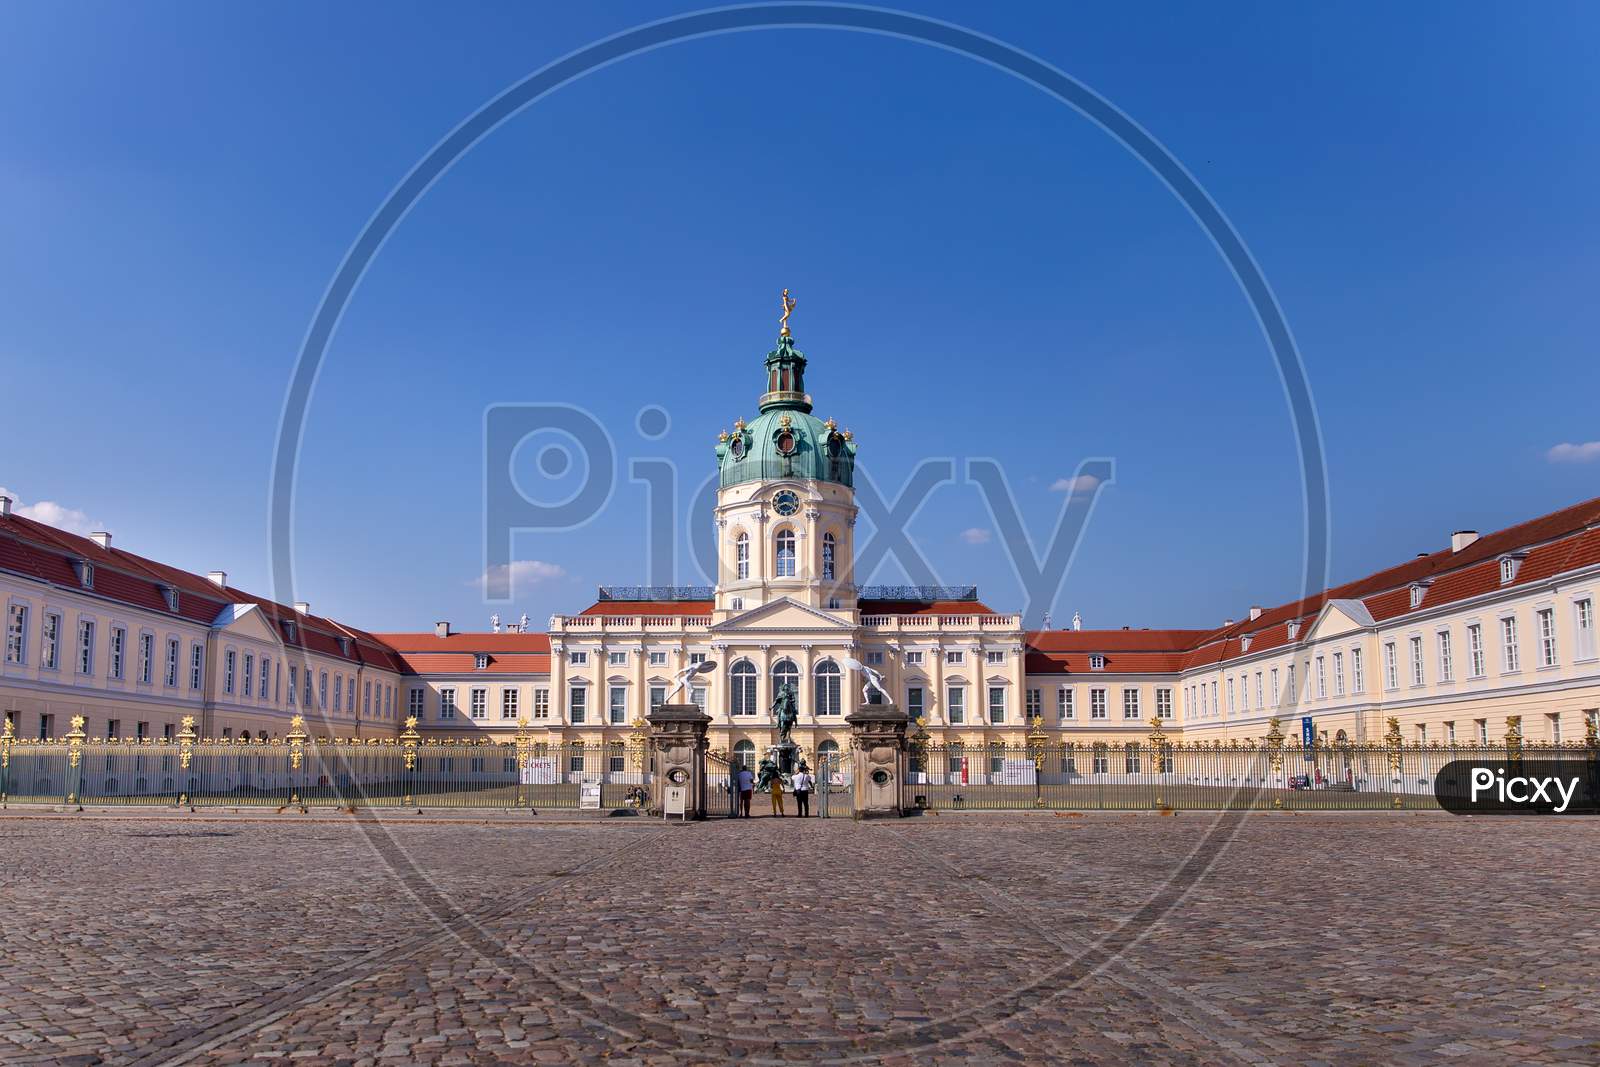 Berlin, Germany - 08/30/2019 - Charlottenburg Palace Outdoor View Of Entrance On A Beautiful Sunny Morning